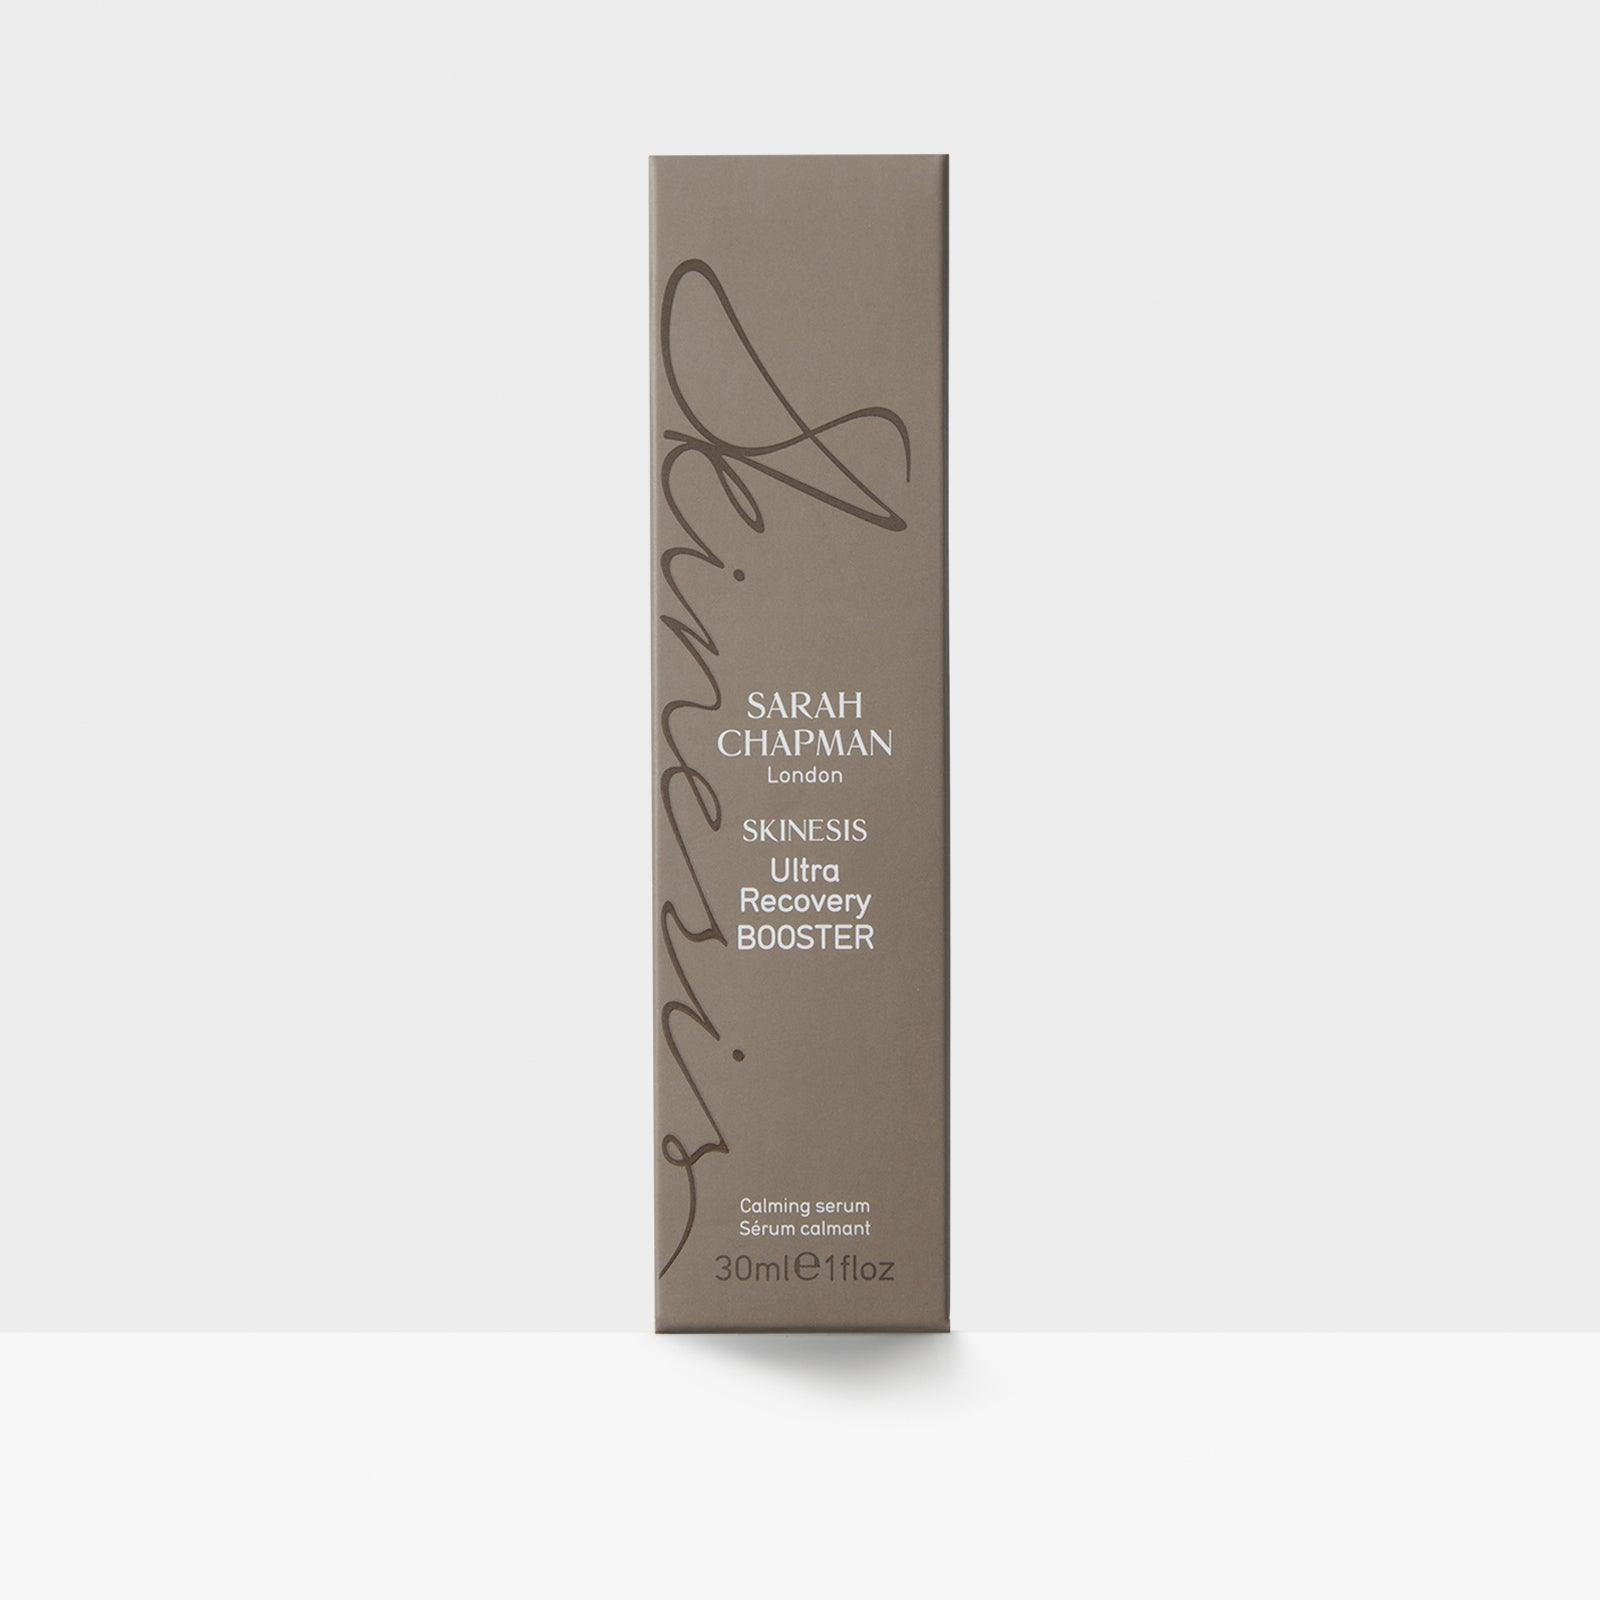 Ultra Recovery Booster calming face serum - Sarah Chapman Skinesis - Outer Packaging